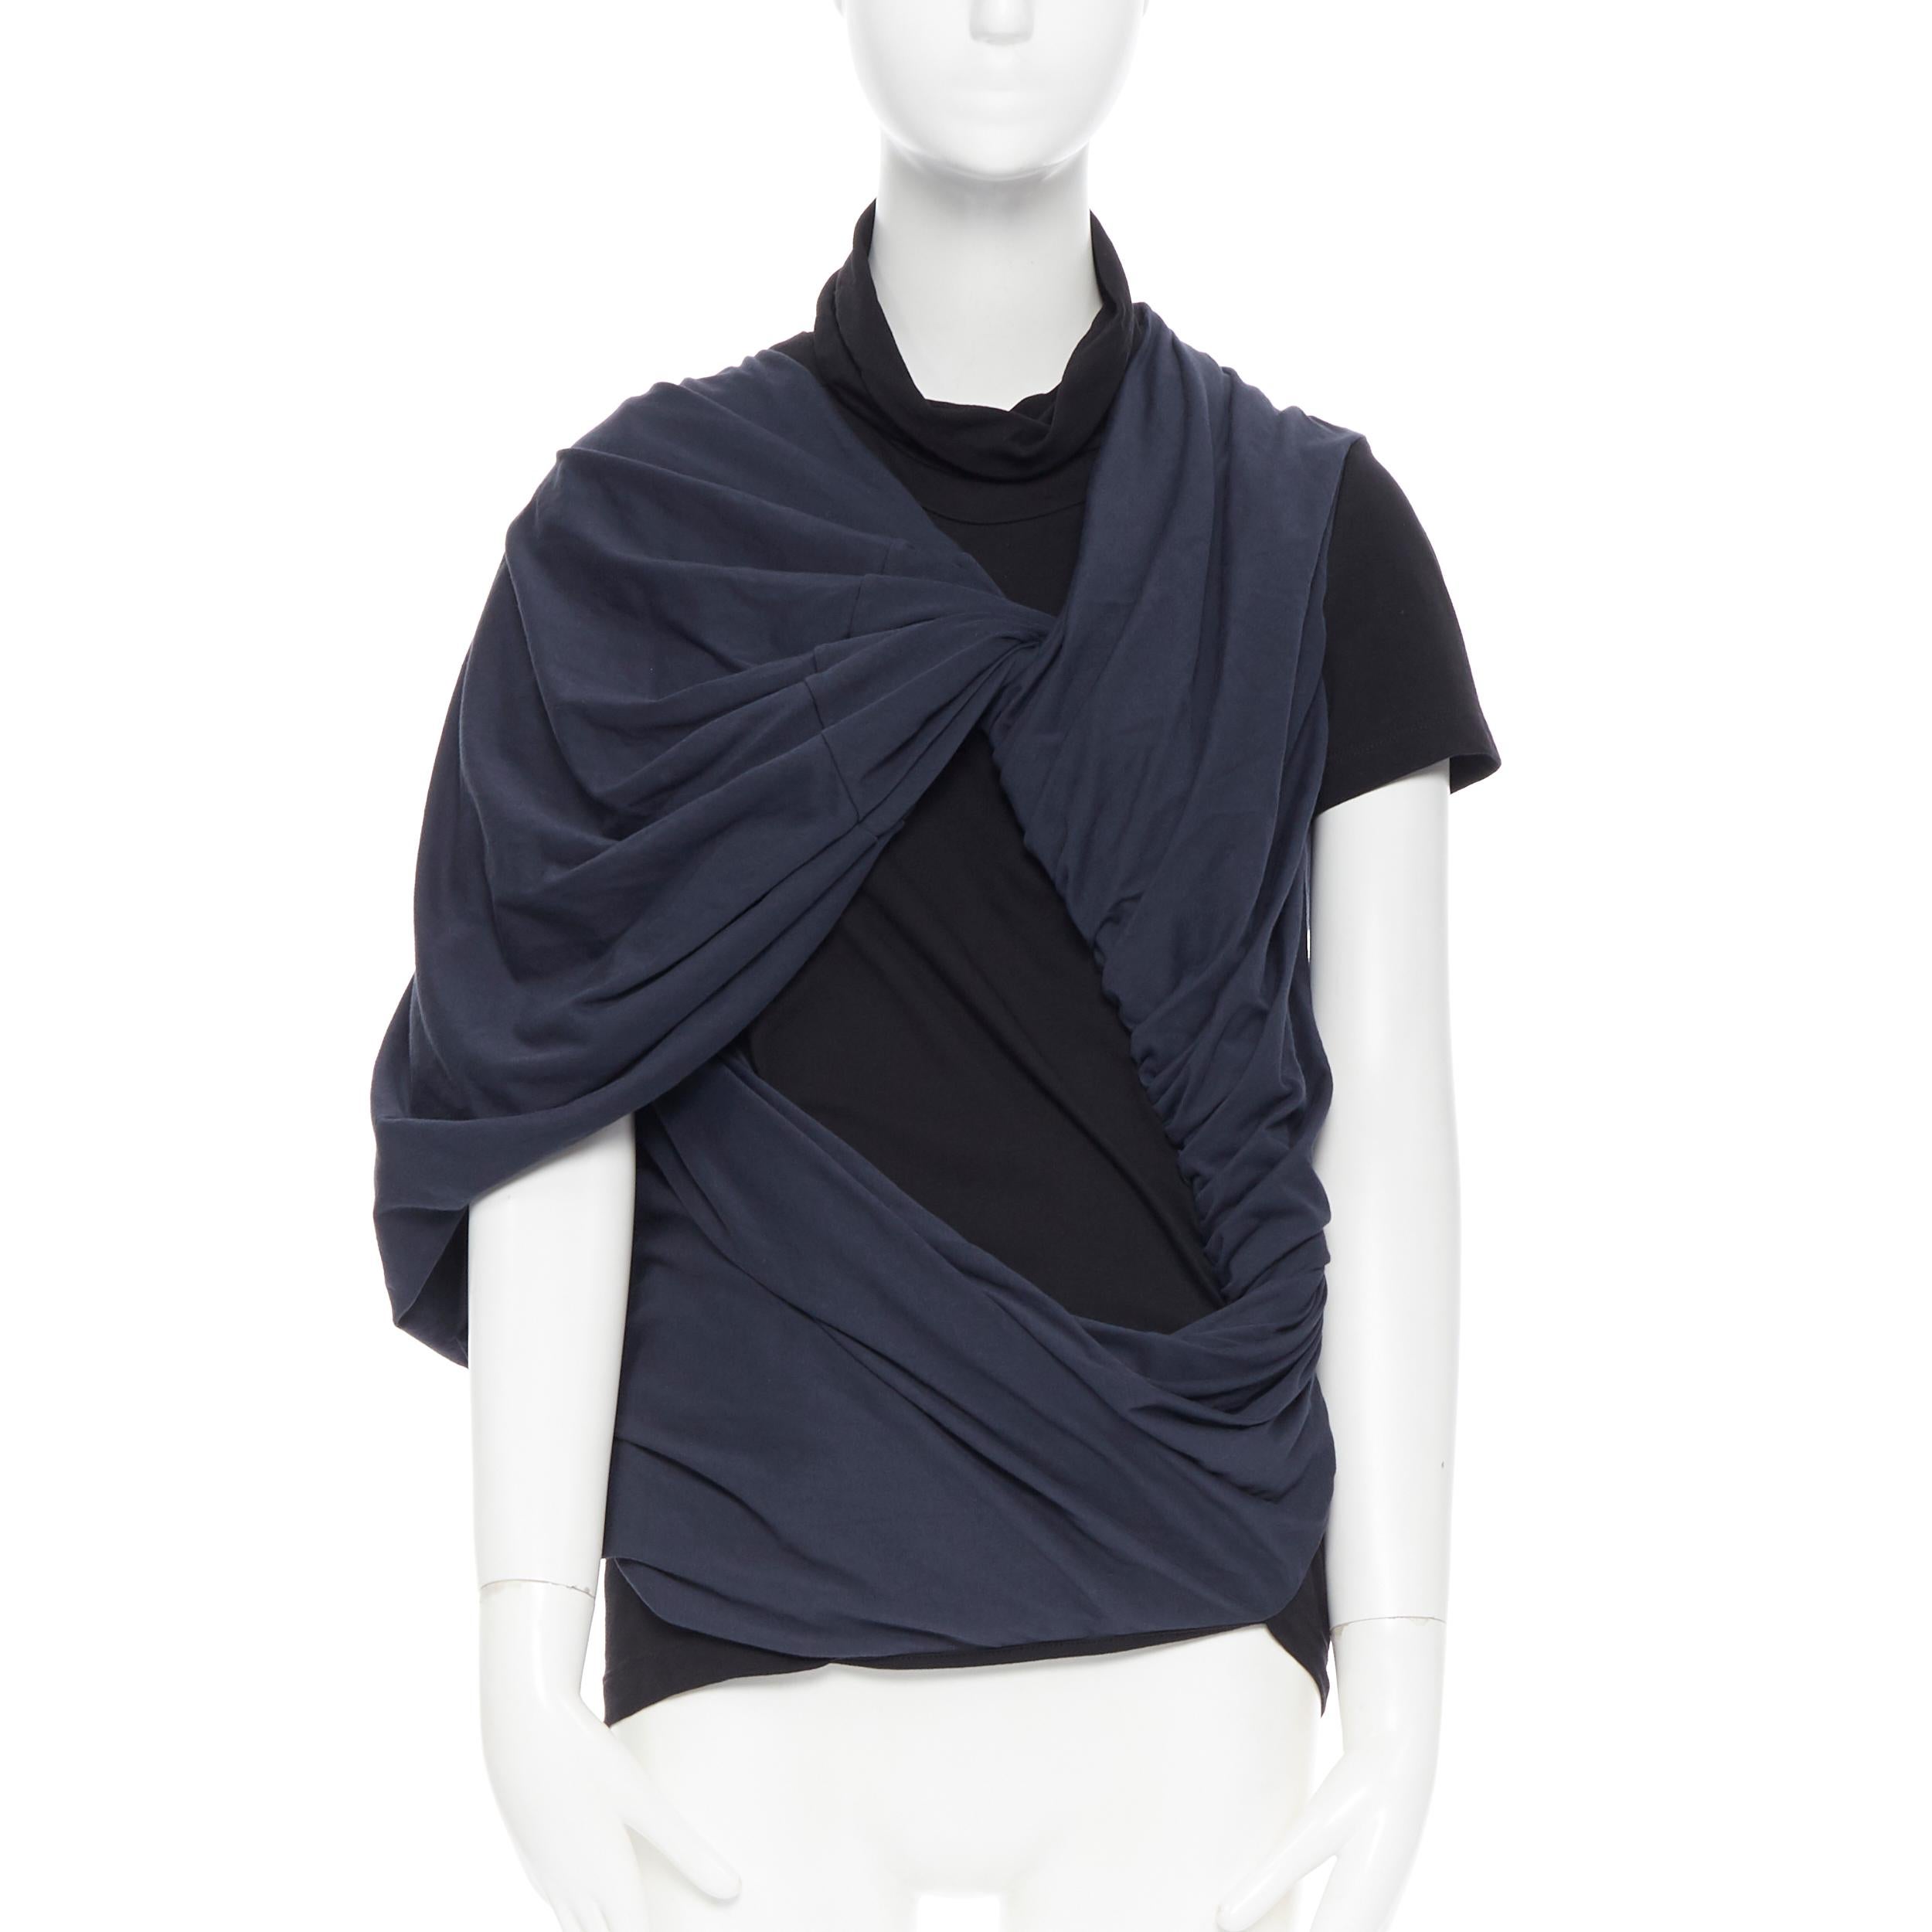 new RICK OWENS DRKSHDW navy black high neck bundle short sleeve tshirt top XS 
Reference: TGAS/B00971 
Brand: DRKSHDW Rick Owens 
Designer: Rick Owens 
Material: Cotton 
Color: Black 
Pattern: Solid 
Extra Detail: High mock neck. Short sleeves black